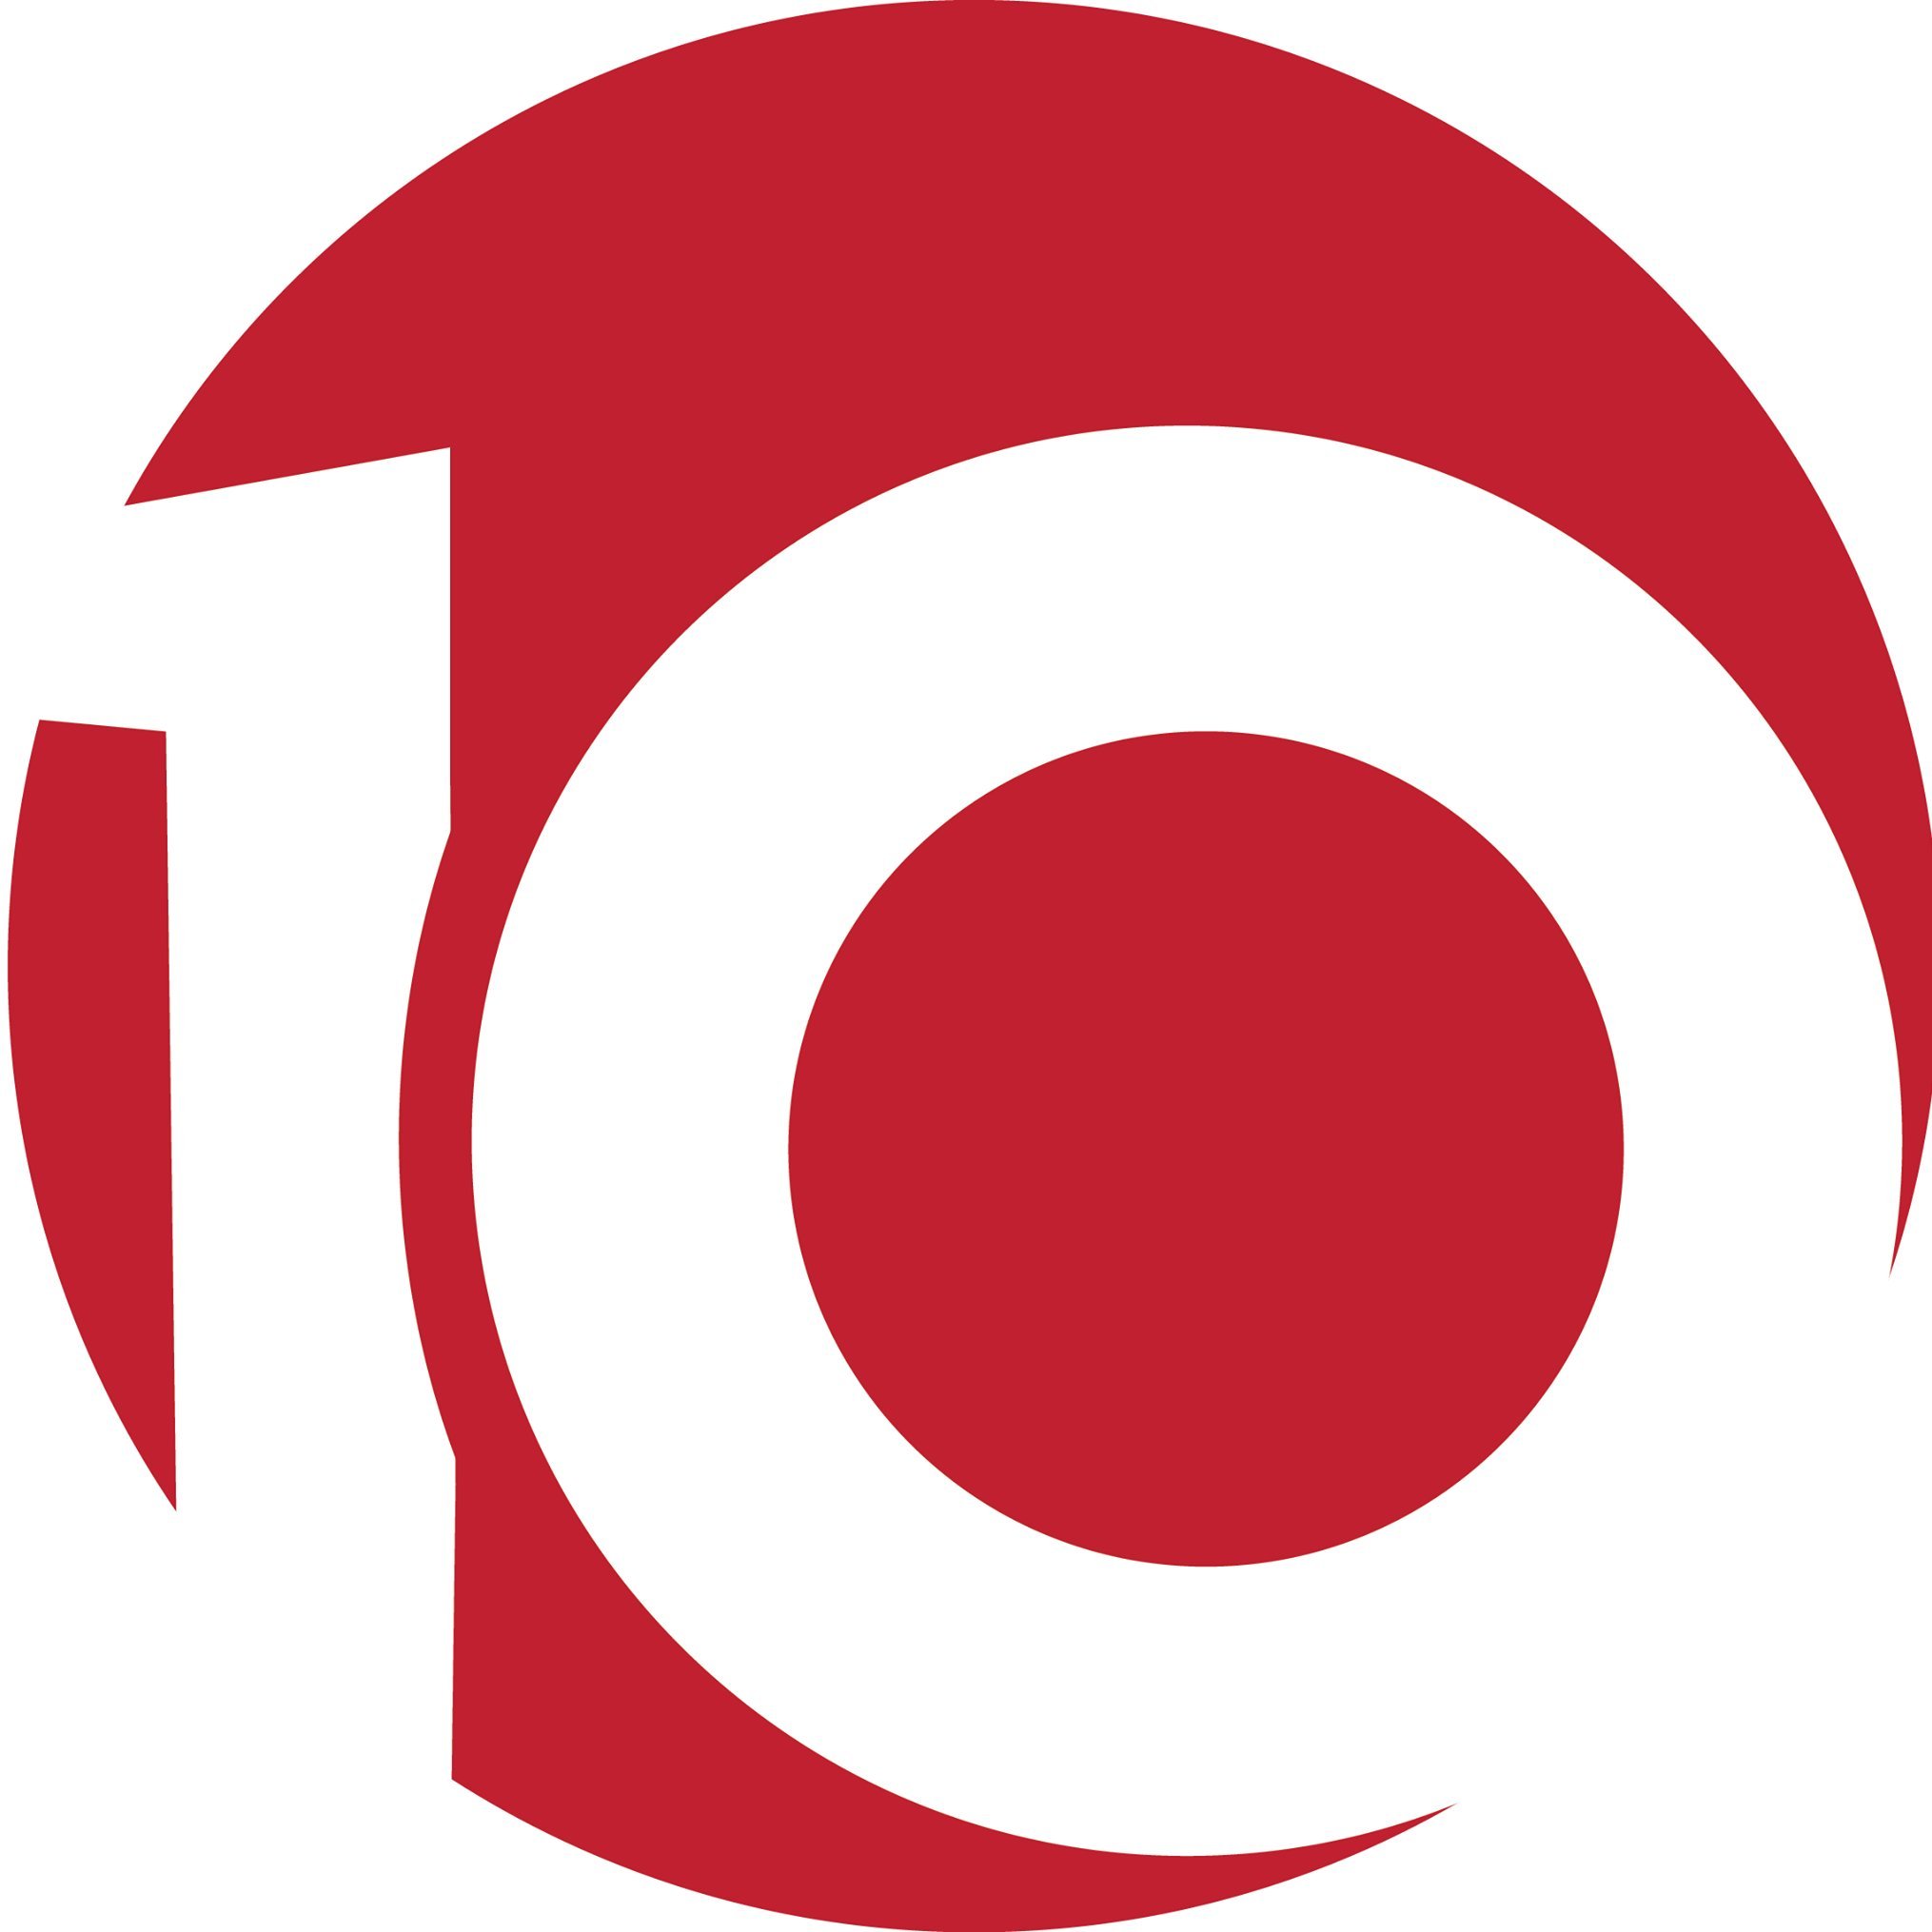 #BUTV10 is Boston University's student-run content distribution service. Watch award-winning news, drama, comedy & variety on campus channel 10 or our website!